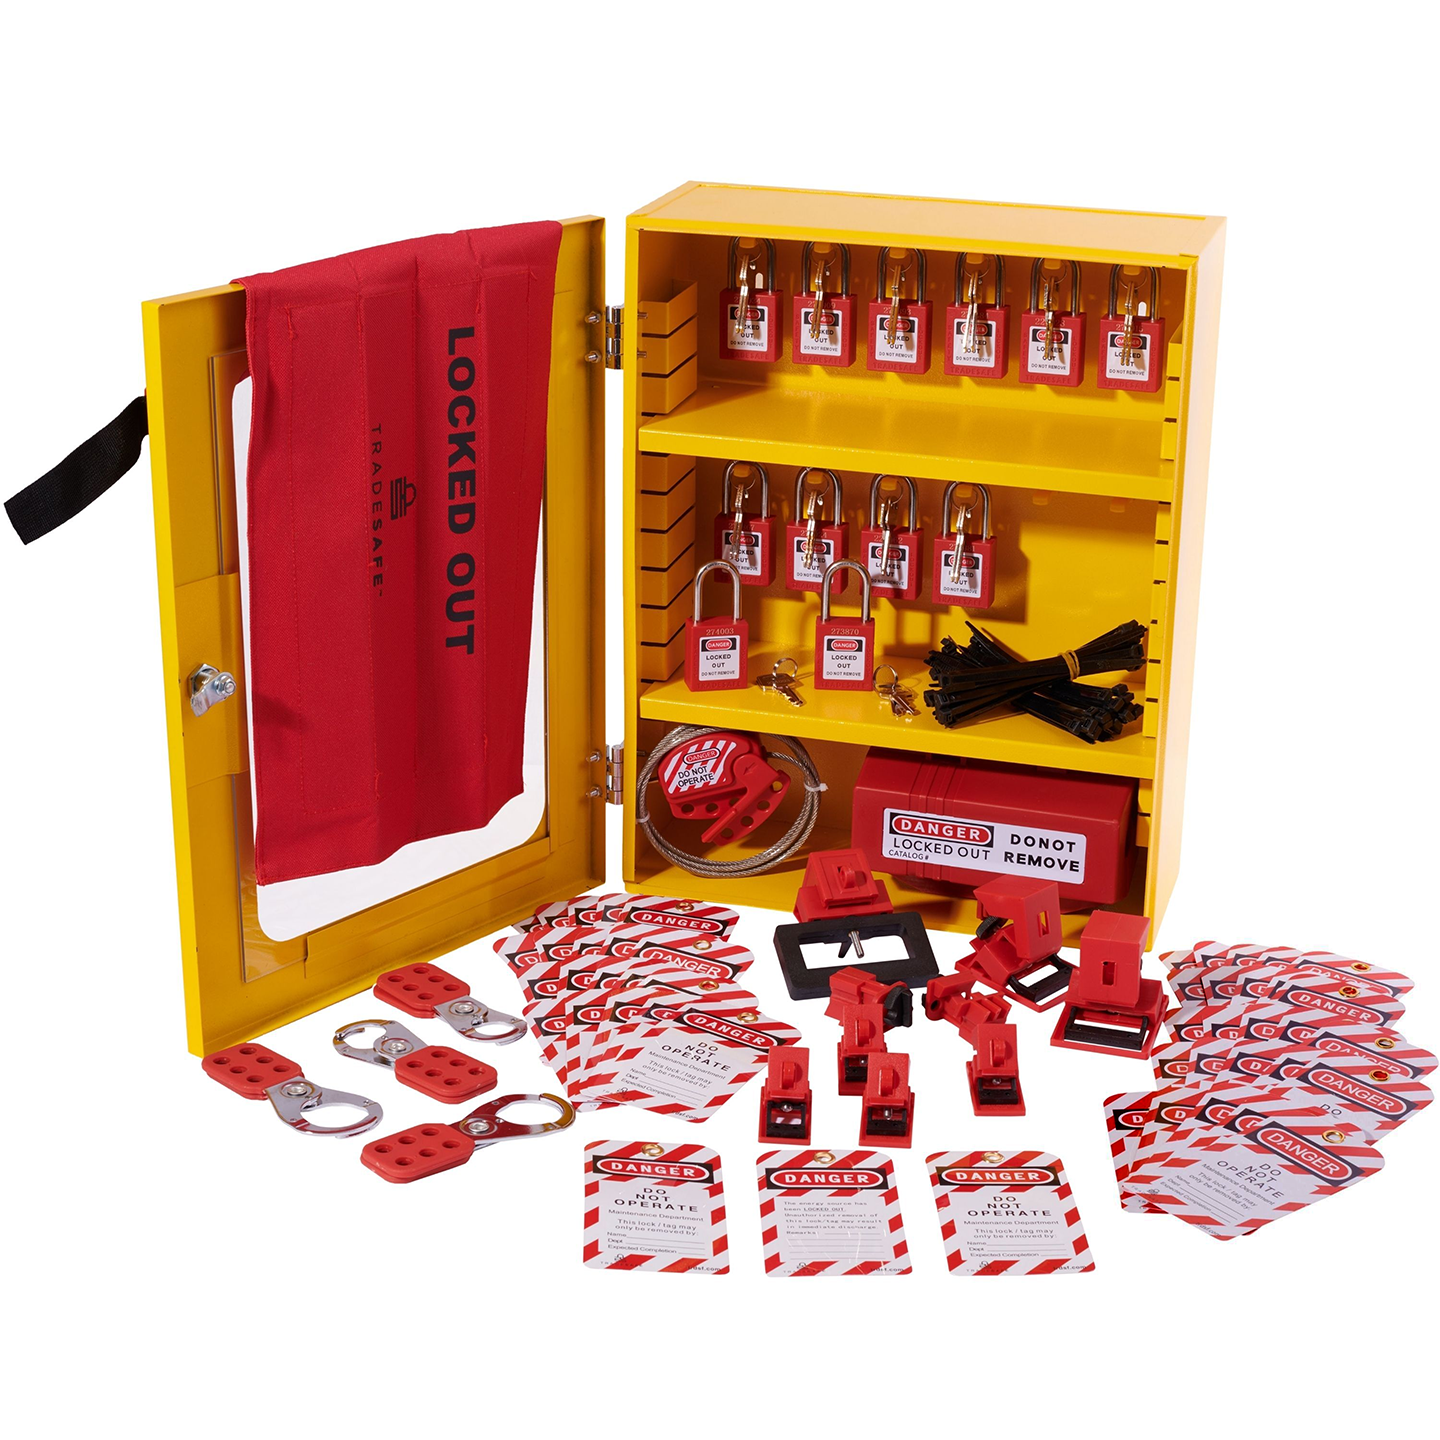 Lockout Tagout Station Cabinet with 75 LOTO Devices